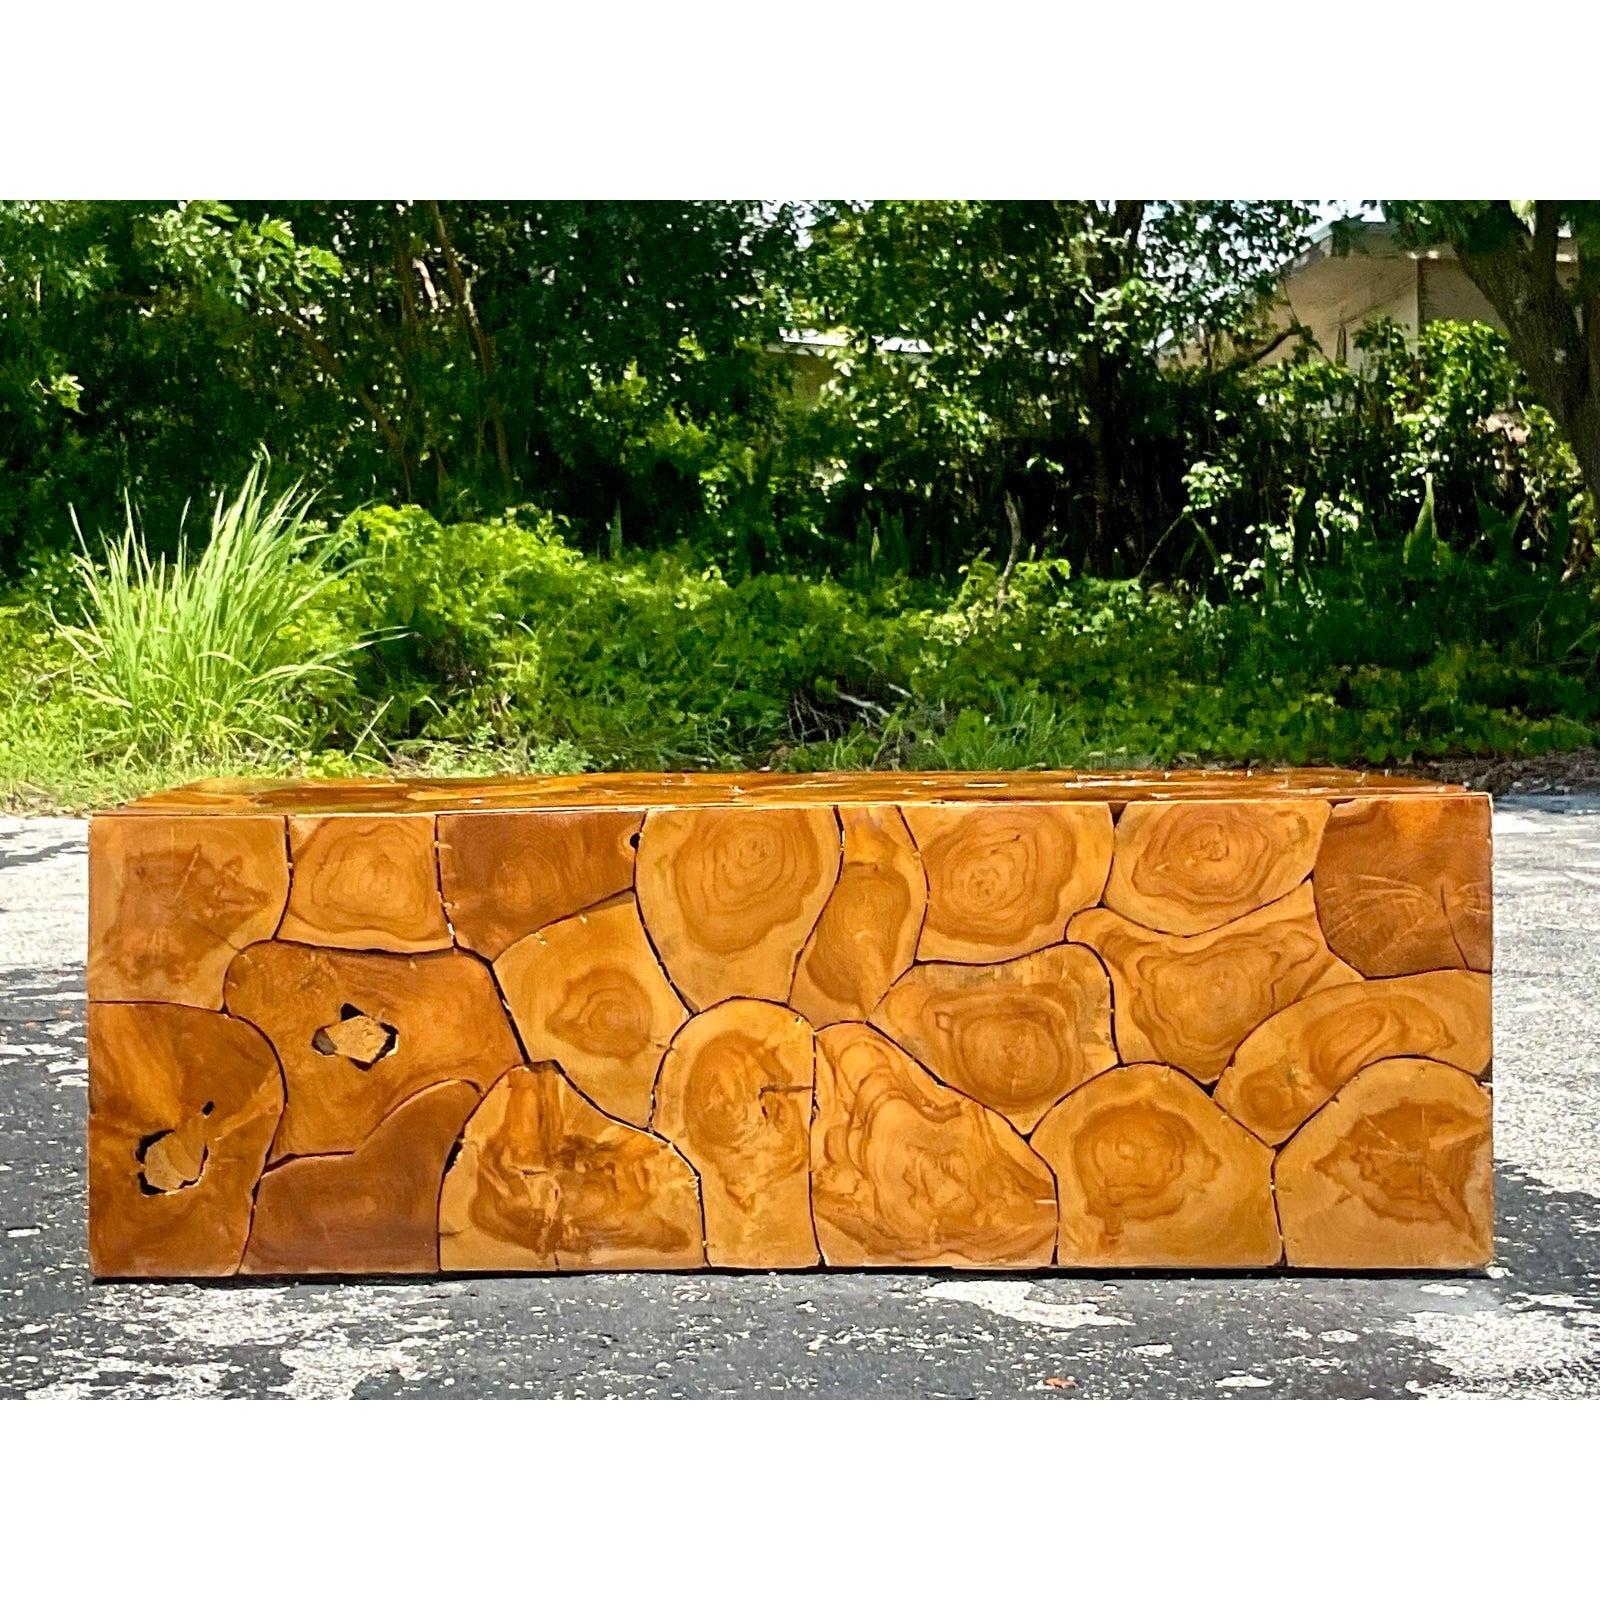 Vintage Boho Coffee Table. A chic collection of tree trunk slices arranged into a block table. A real showstopper. Acquired from a Palm Beach estate.